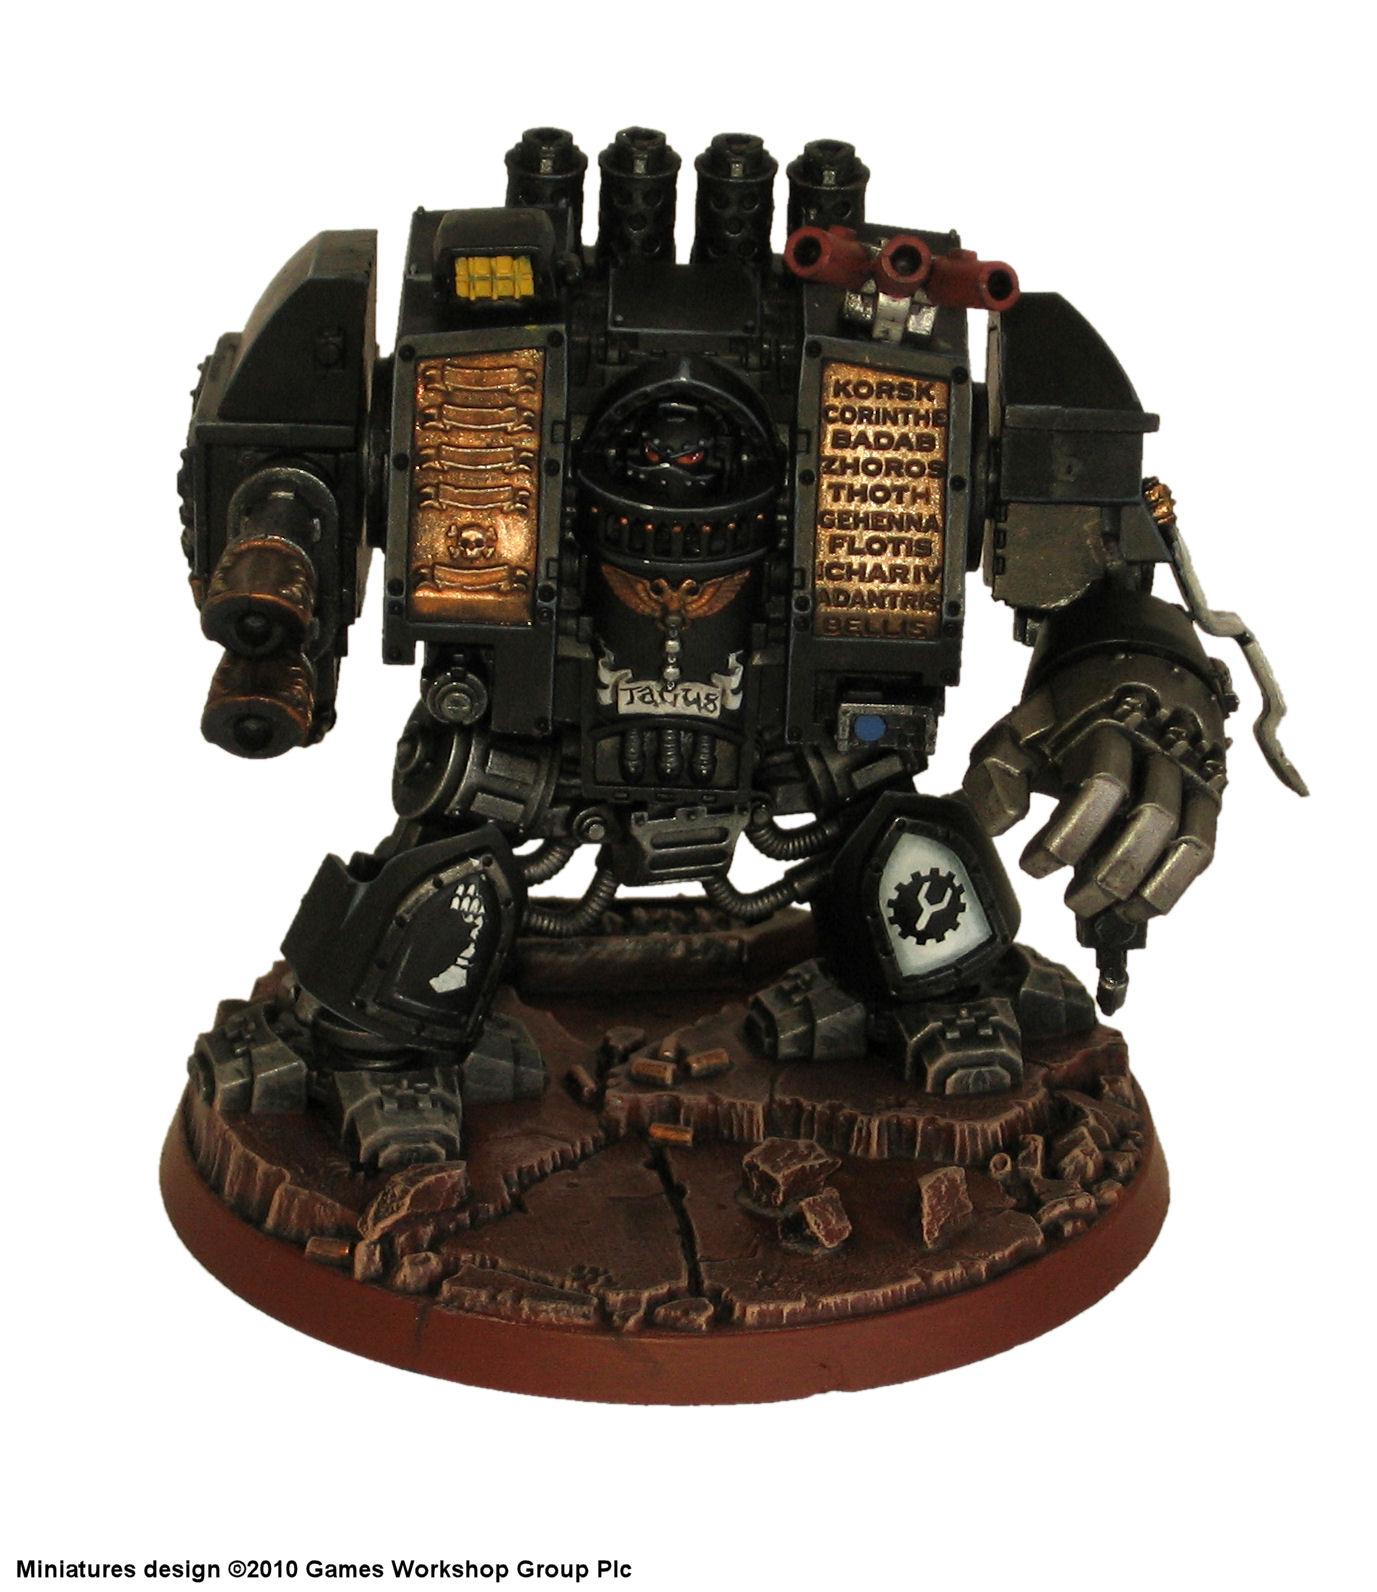 Dreadnought, Hands, Iron, Science-fiction, Space, Space Marines, Tagus, Venerable, Warhammer 40,000, Warhammer Fantasy